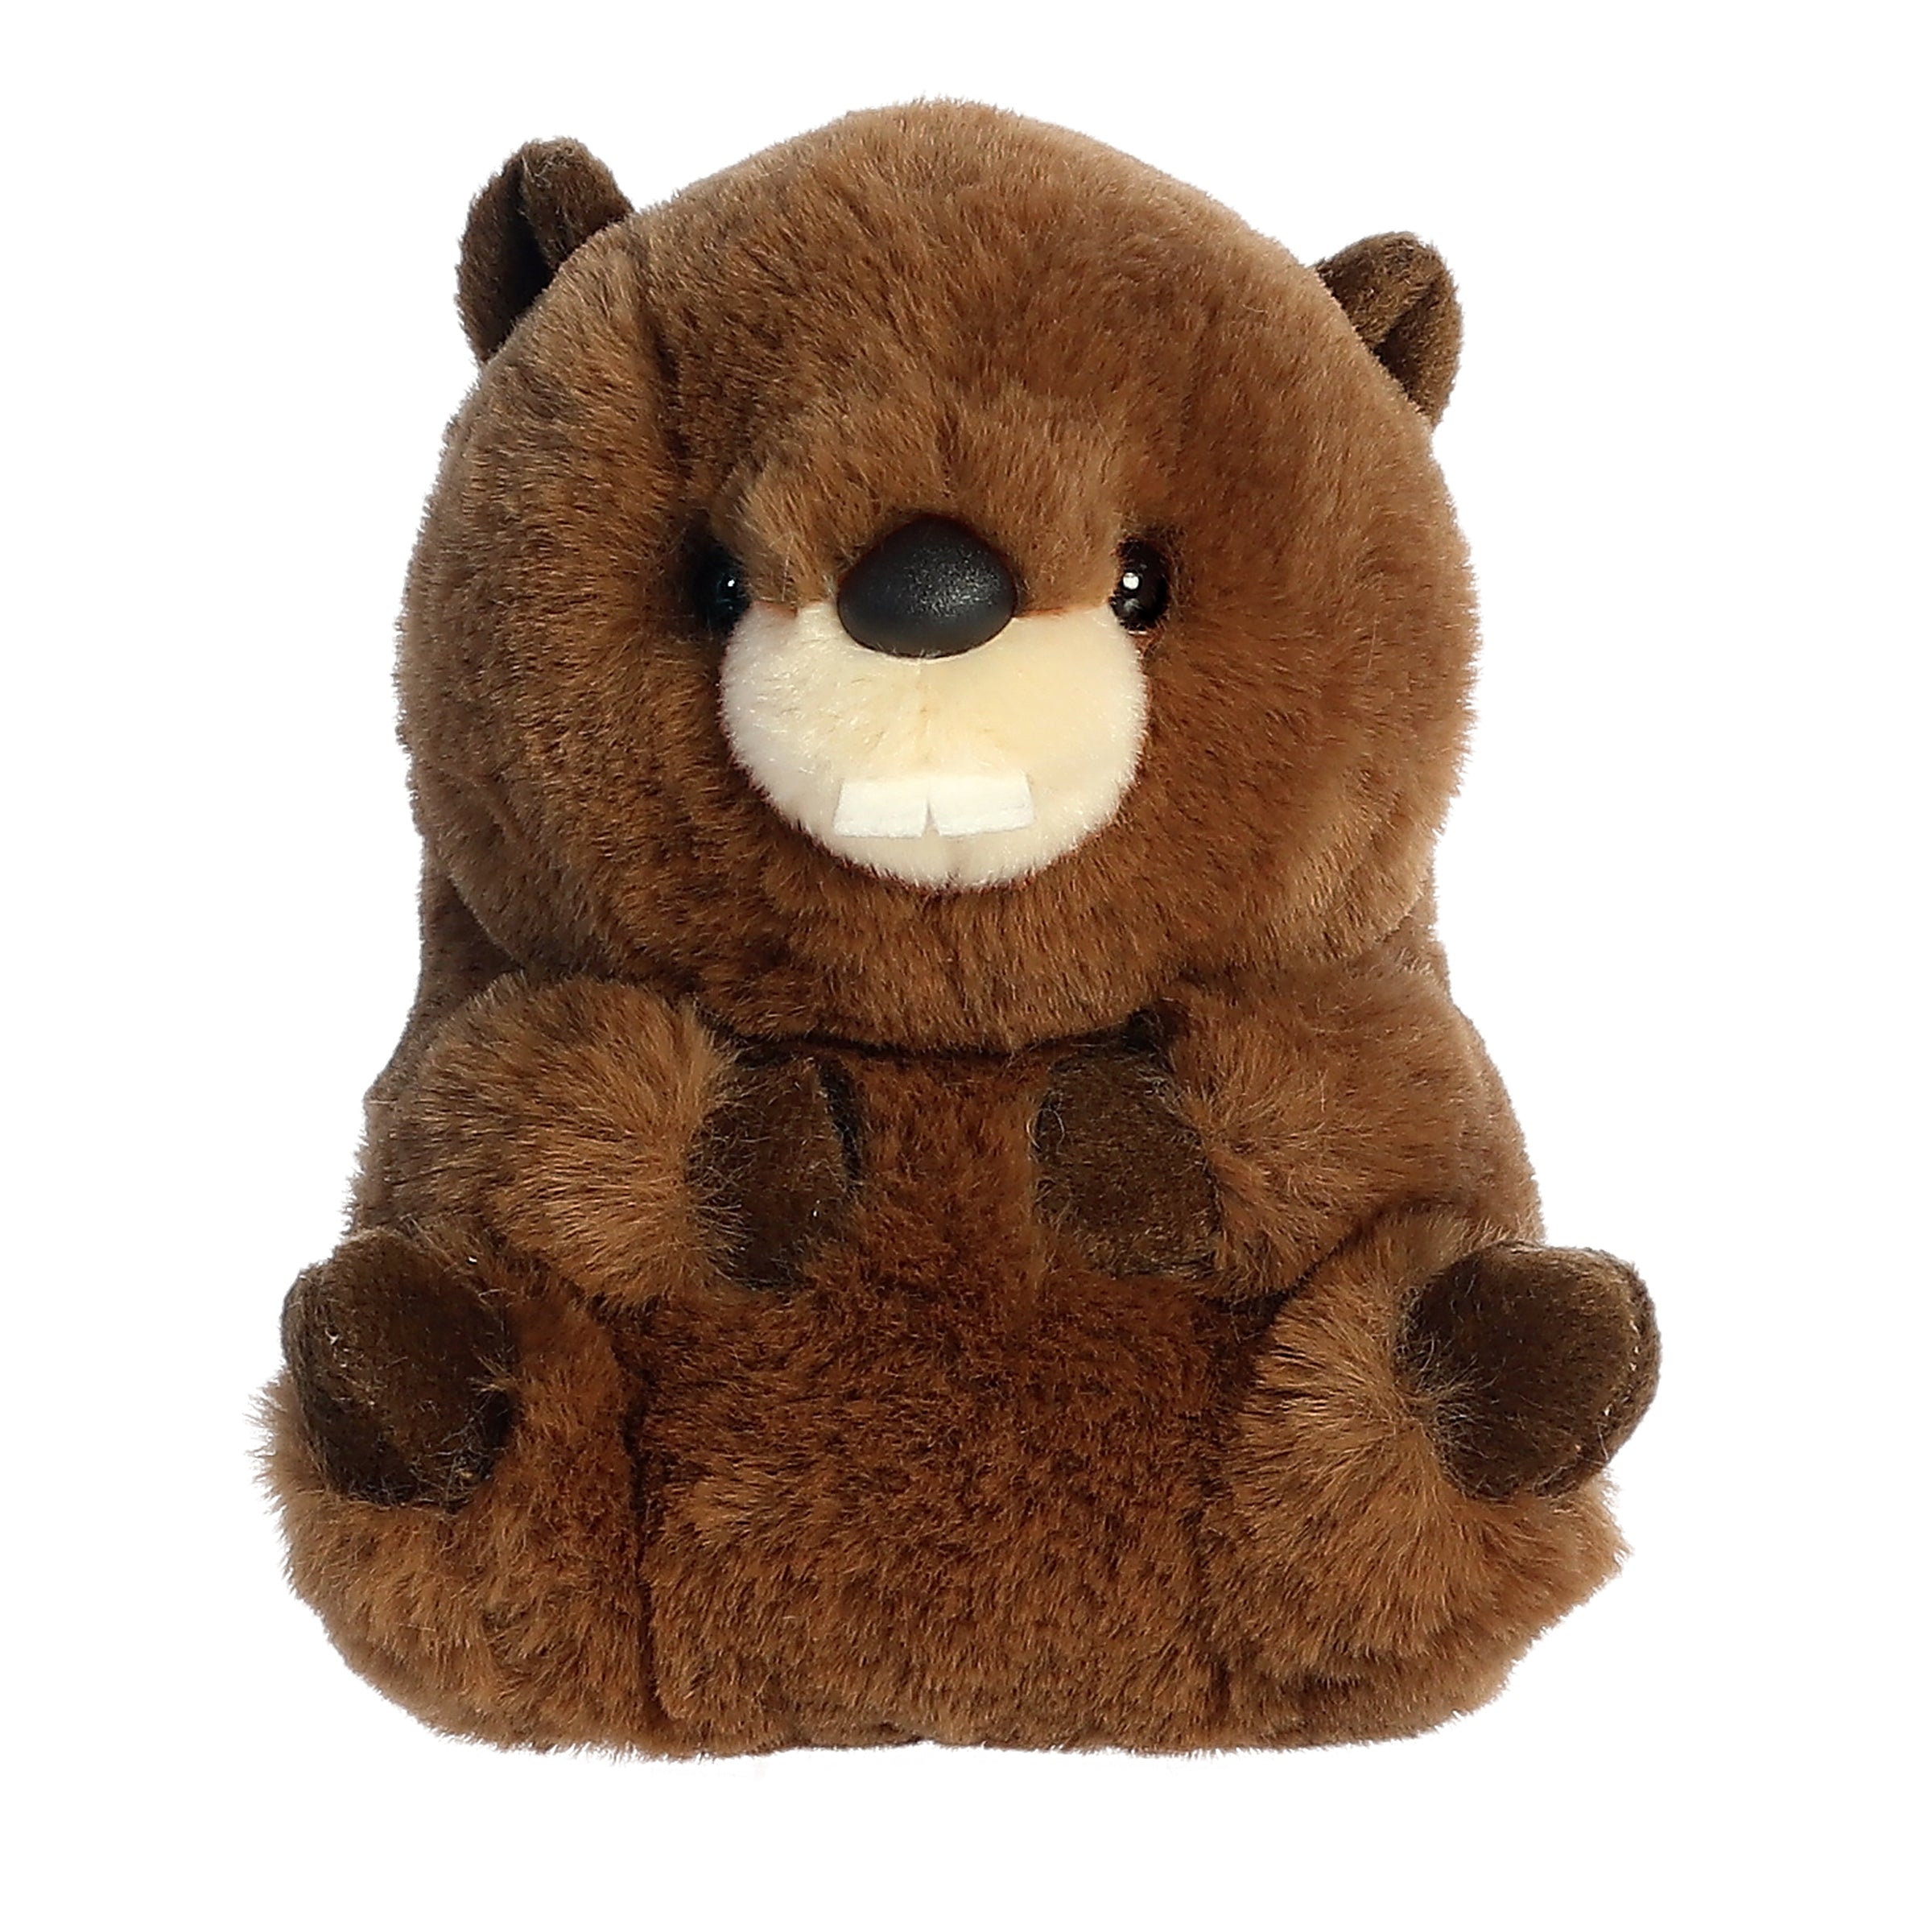 Chocolate Beaver plush, warmly coated and featuring a charming, adventurous expression with a playful hint of tree bark.